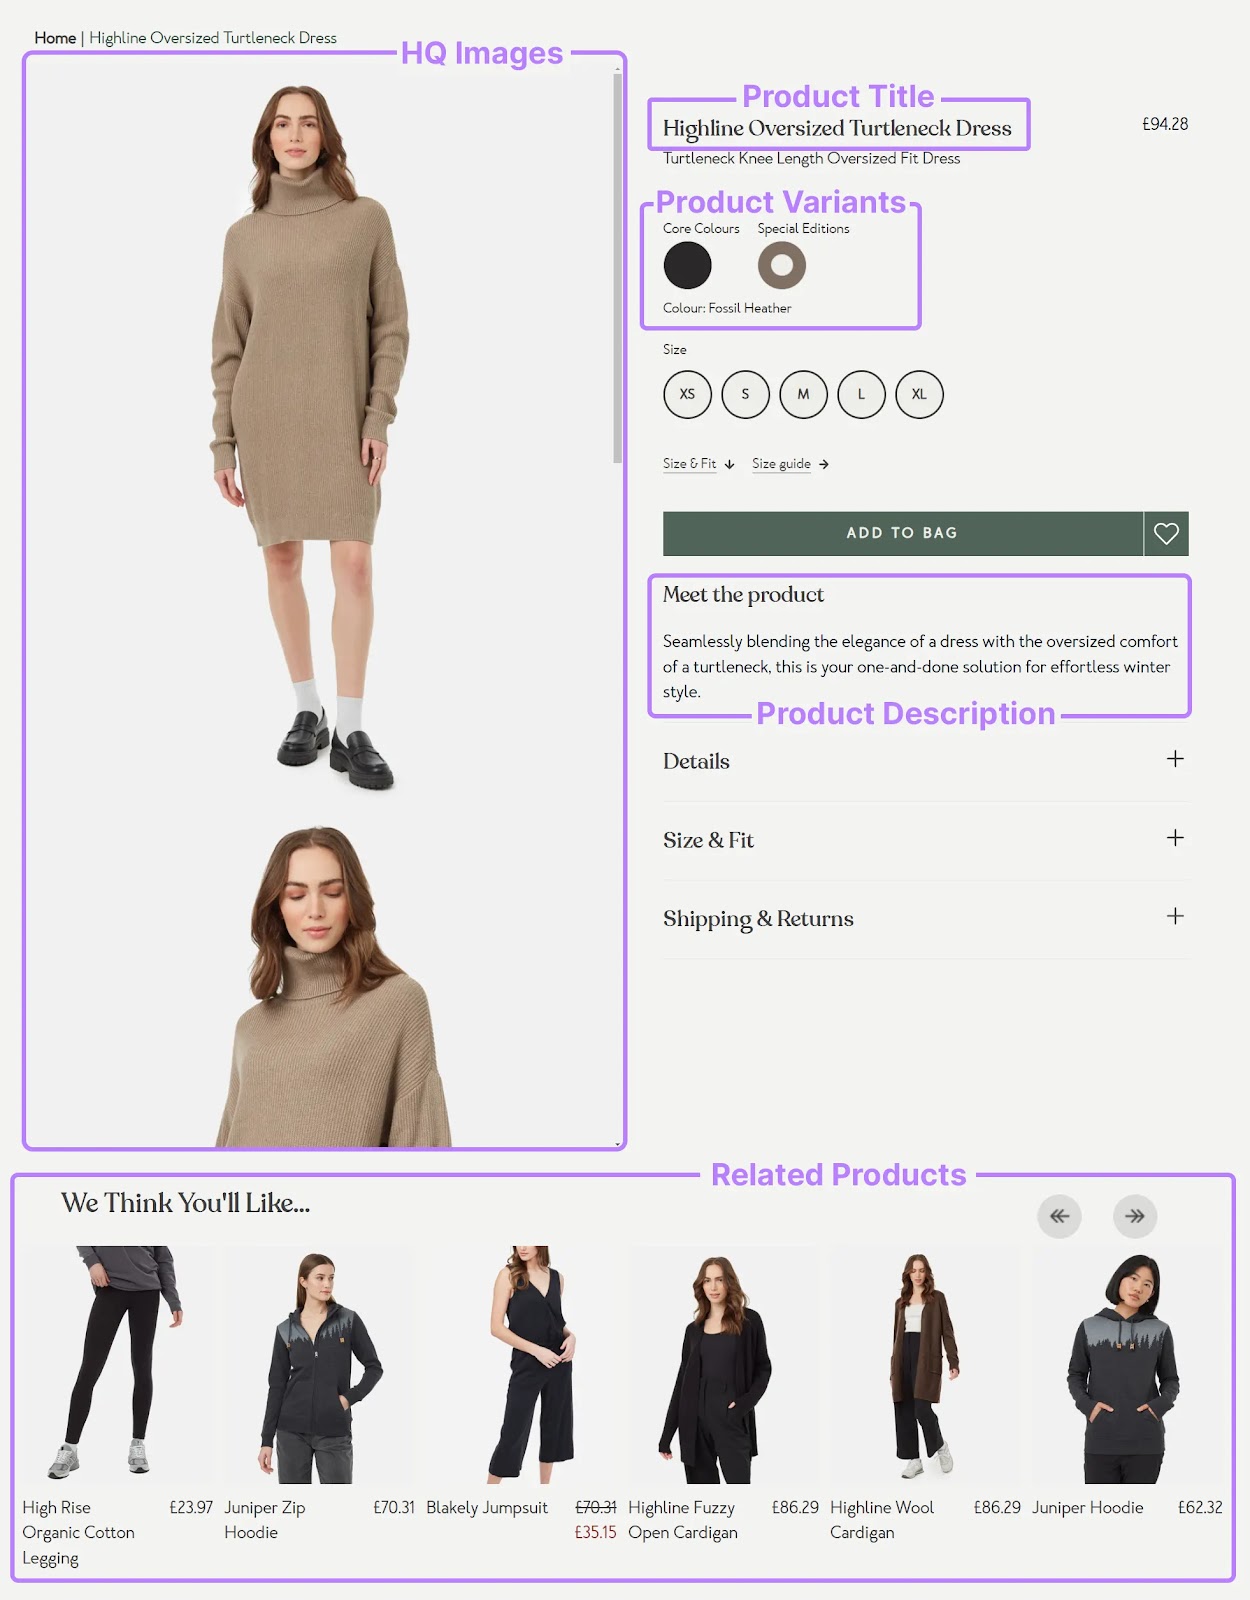 A product page with images, product title, product variants, product description, and related products sections highlighted